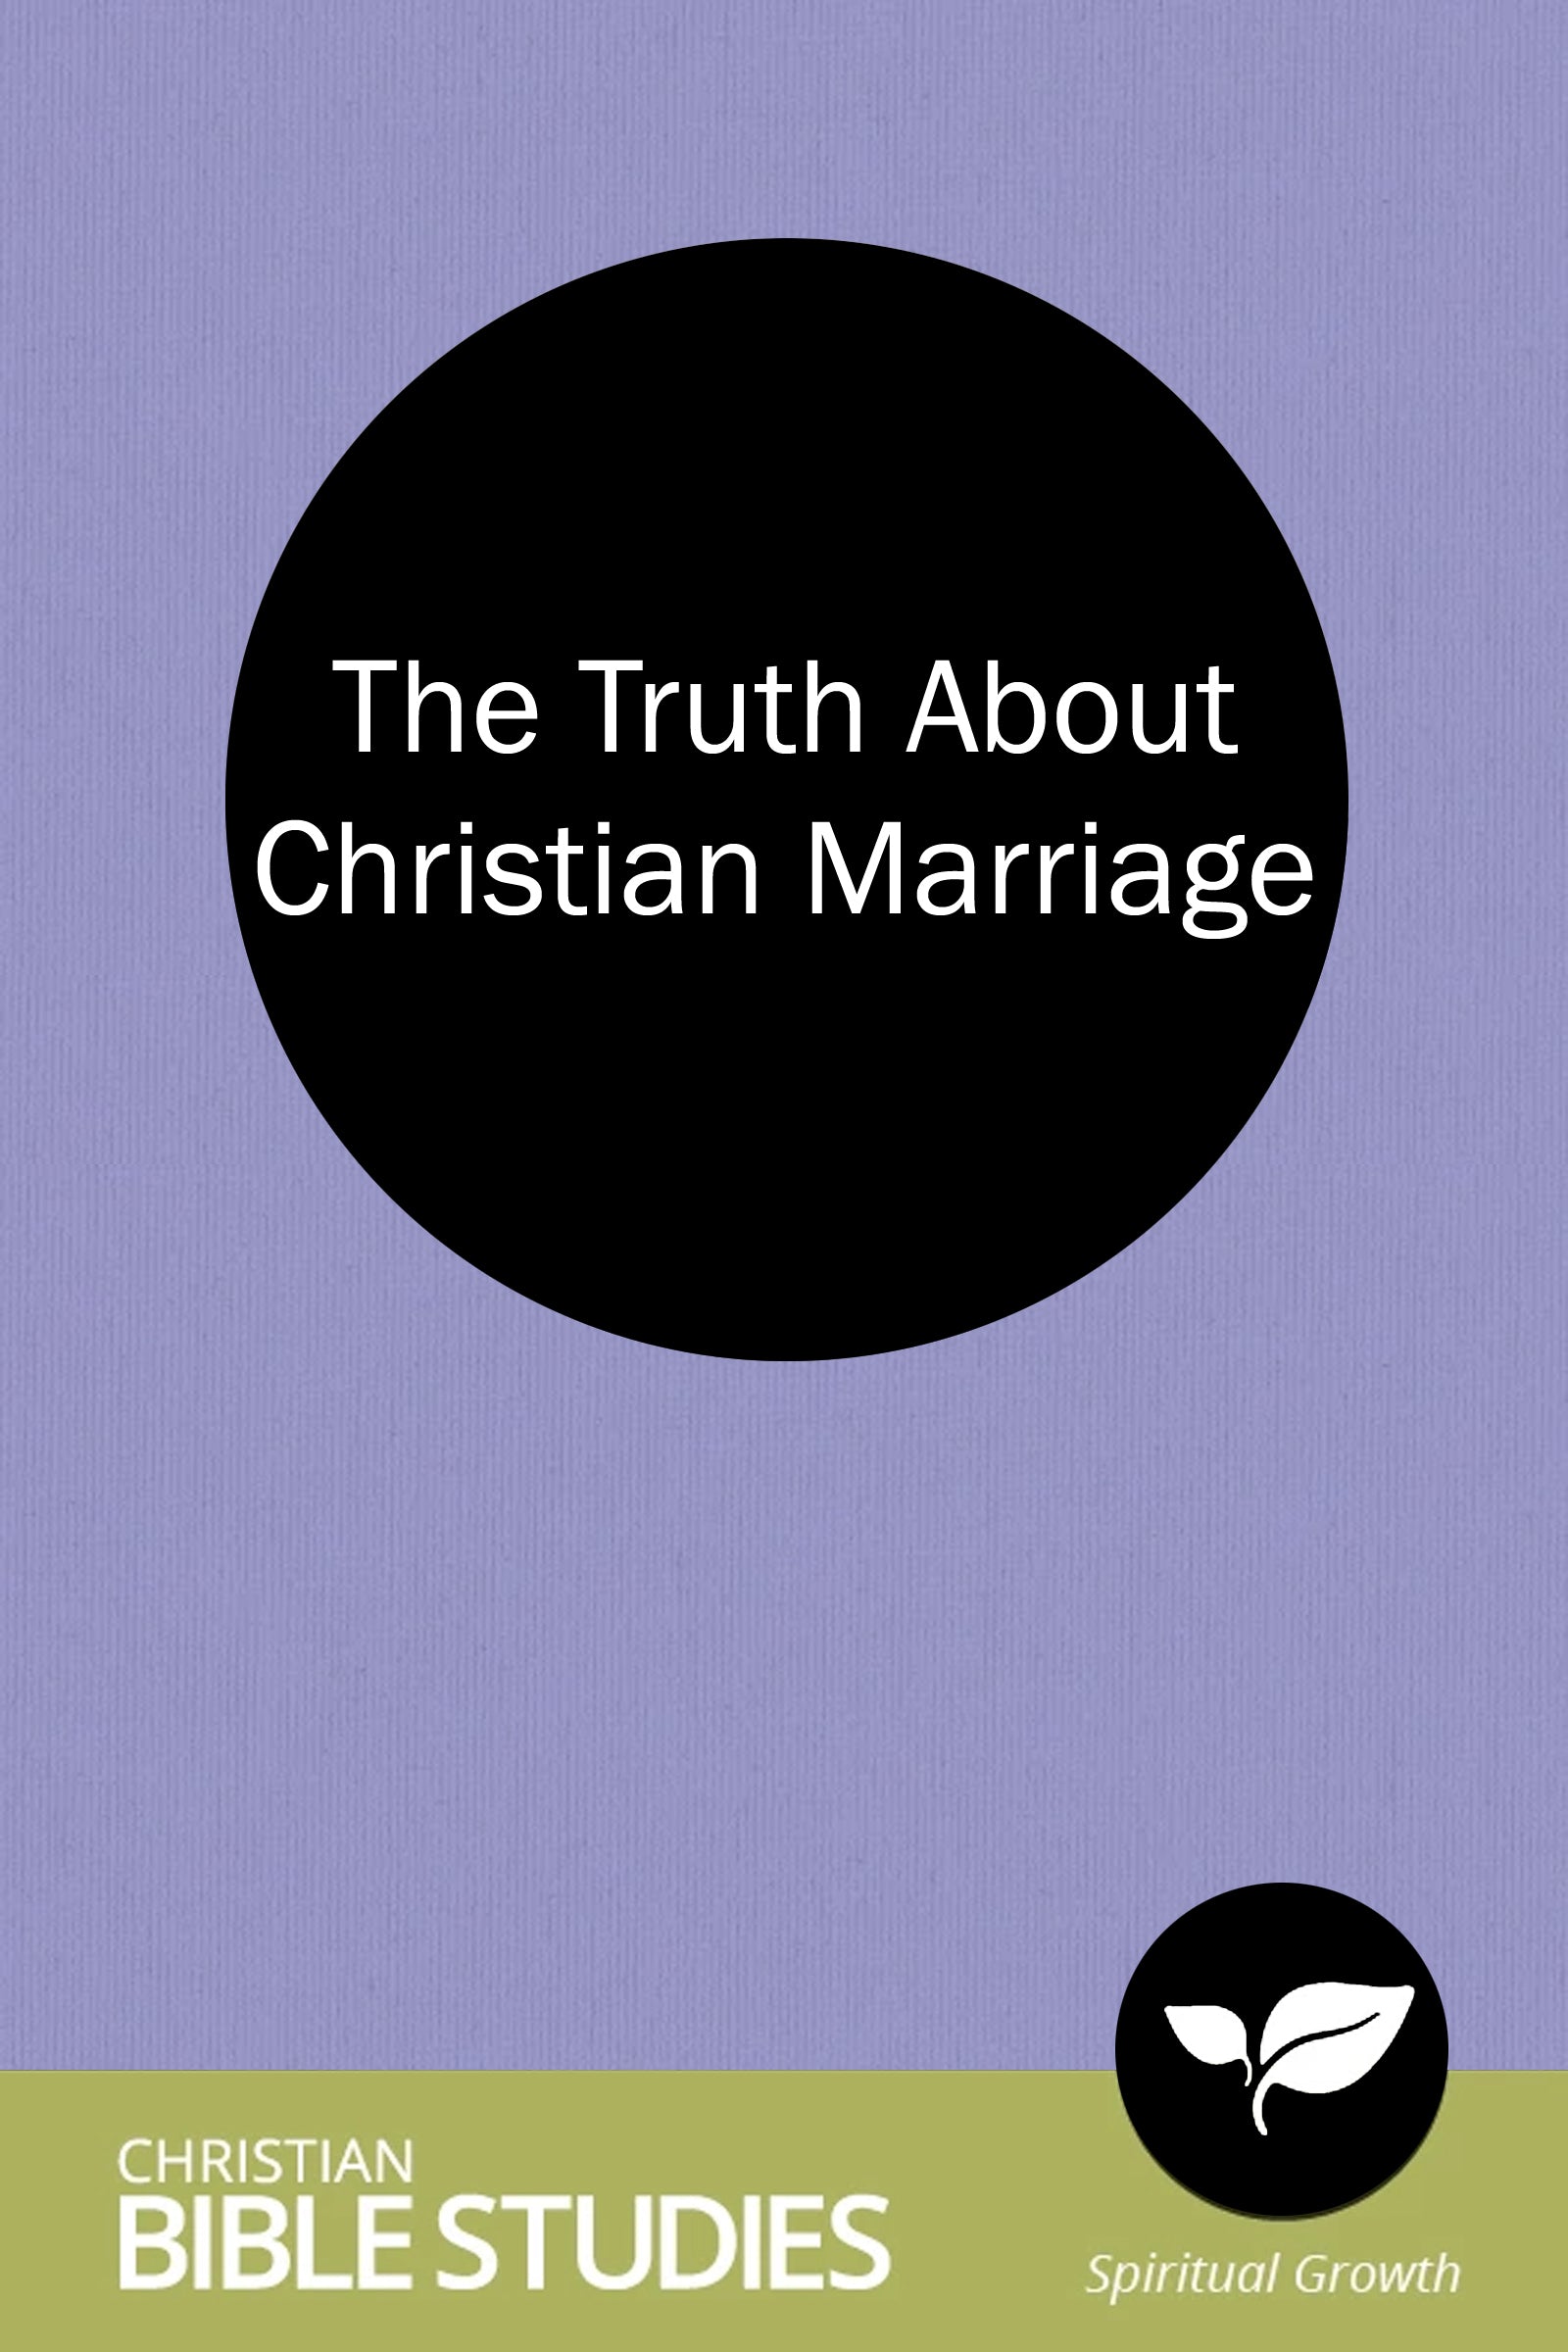 The Truth About Christian Marriage